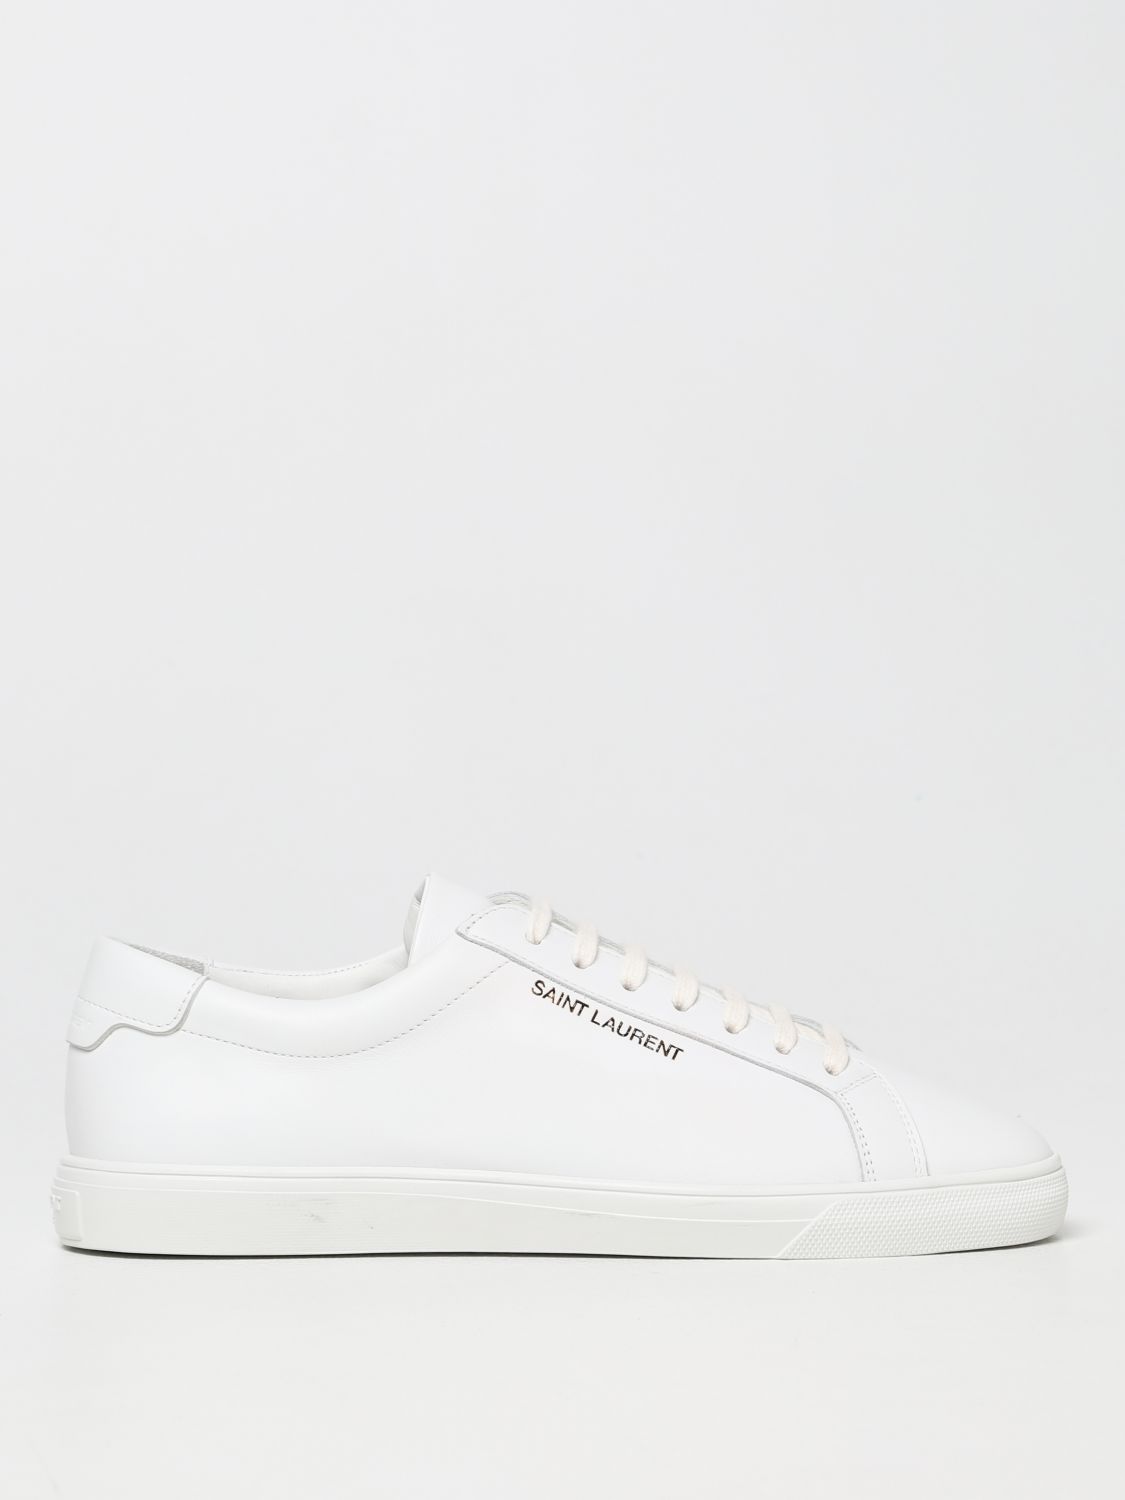 SAINT LAURENT ANDY SMOOTH LEATHER SNEAKERS,366683001